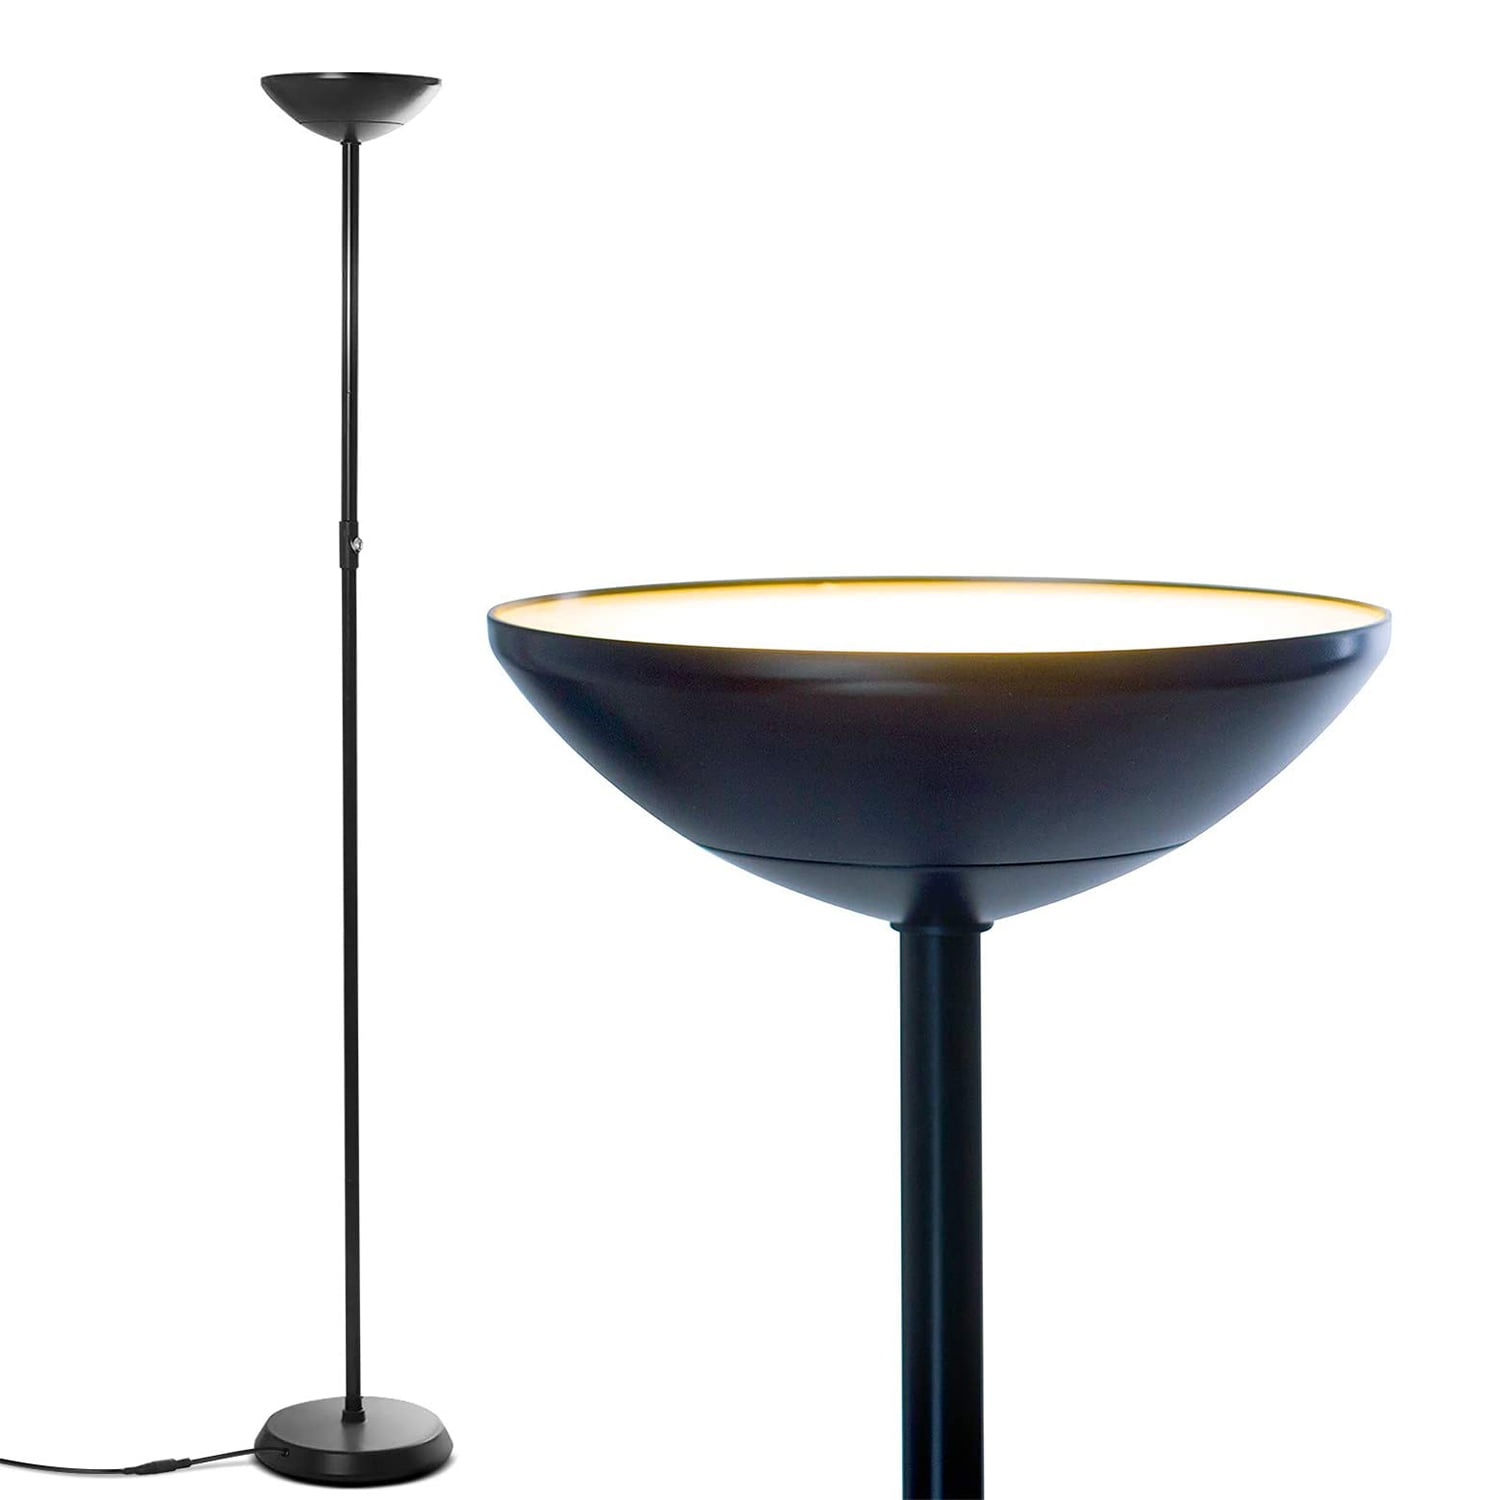 Brightech Skylite Bright Led Torchiere Floor Lamp For Offices